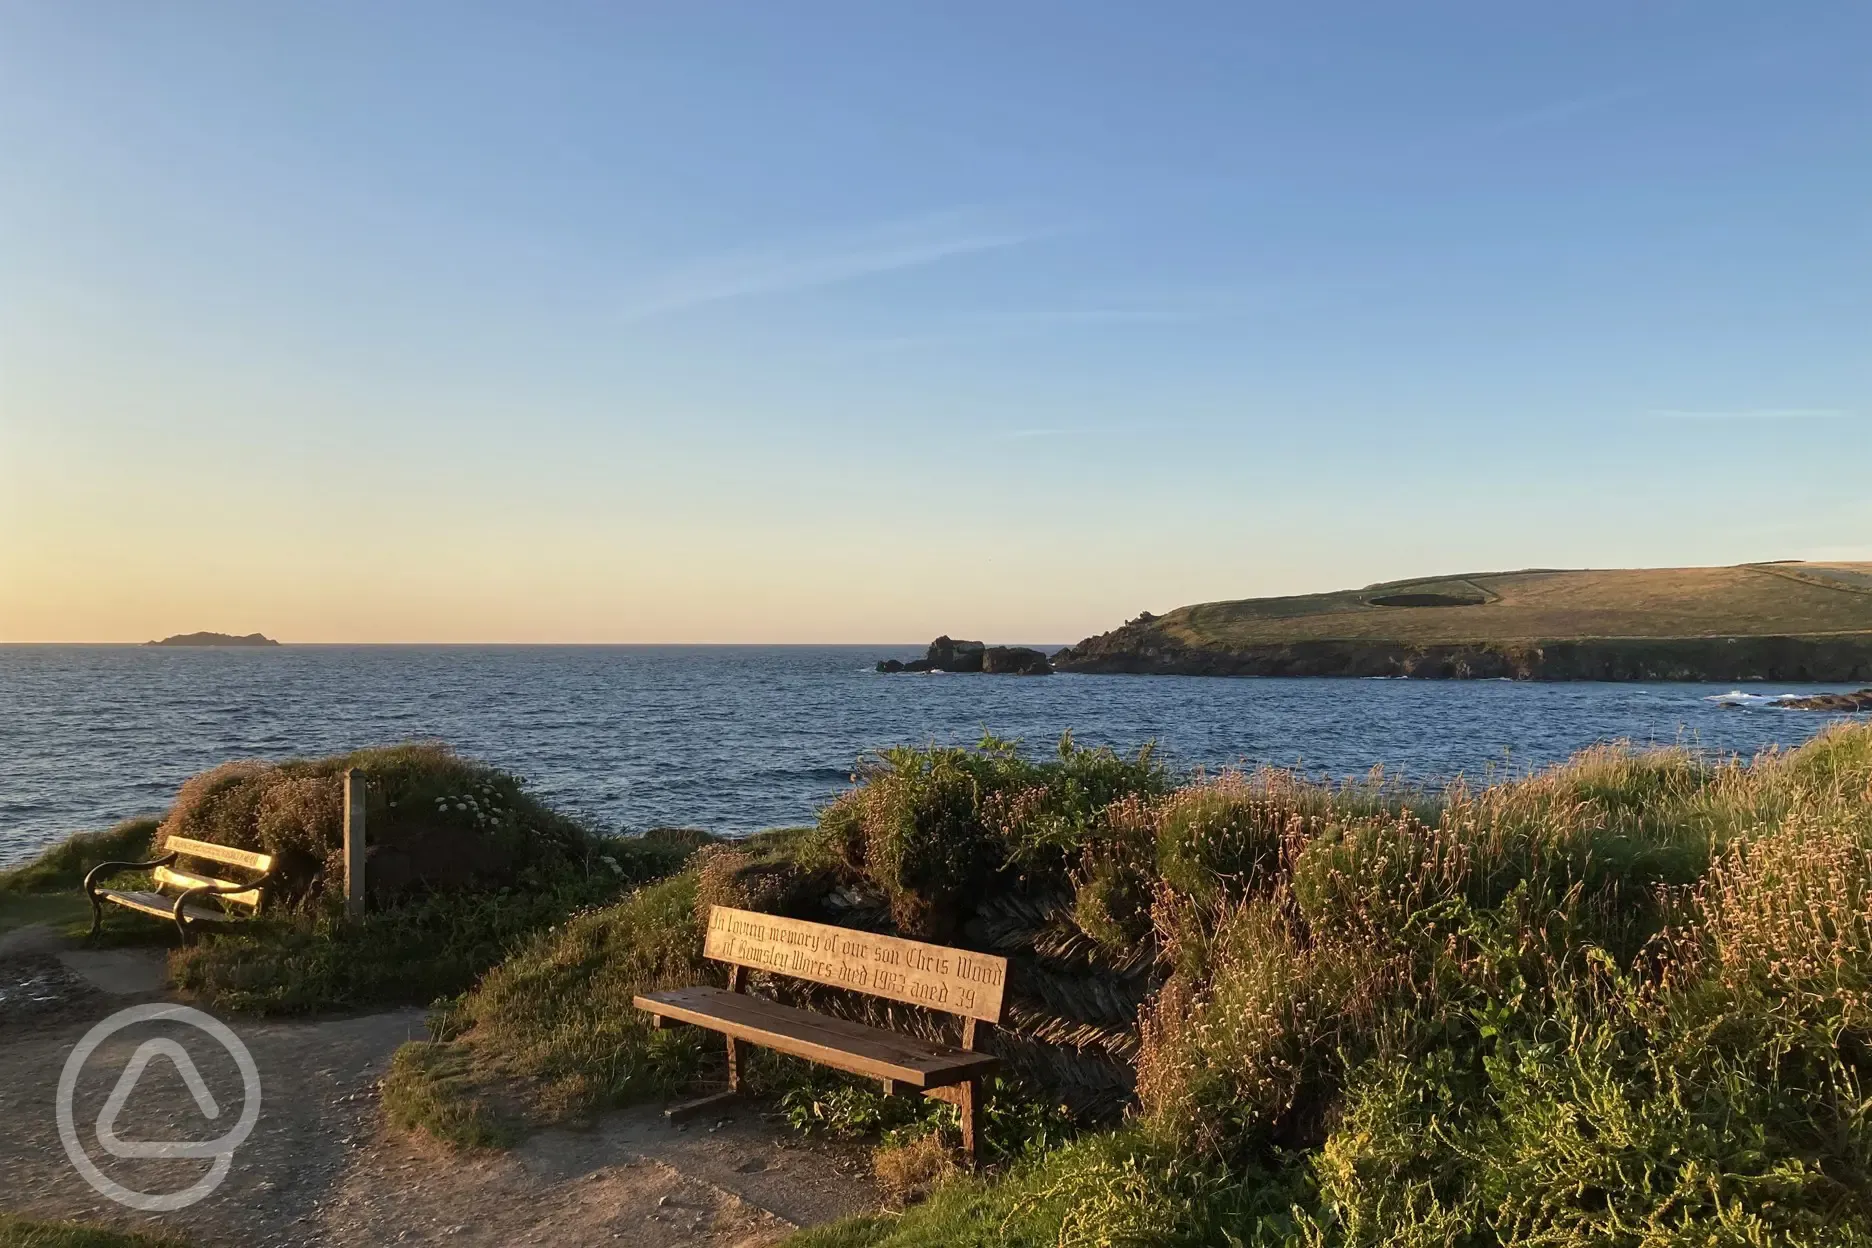 Trevose View Farm in Padstow, Cornwall - book online now